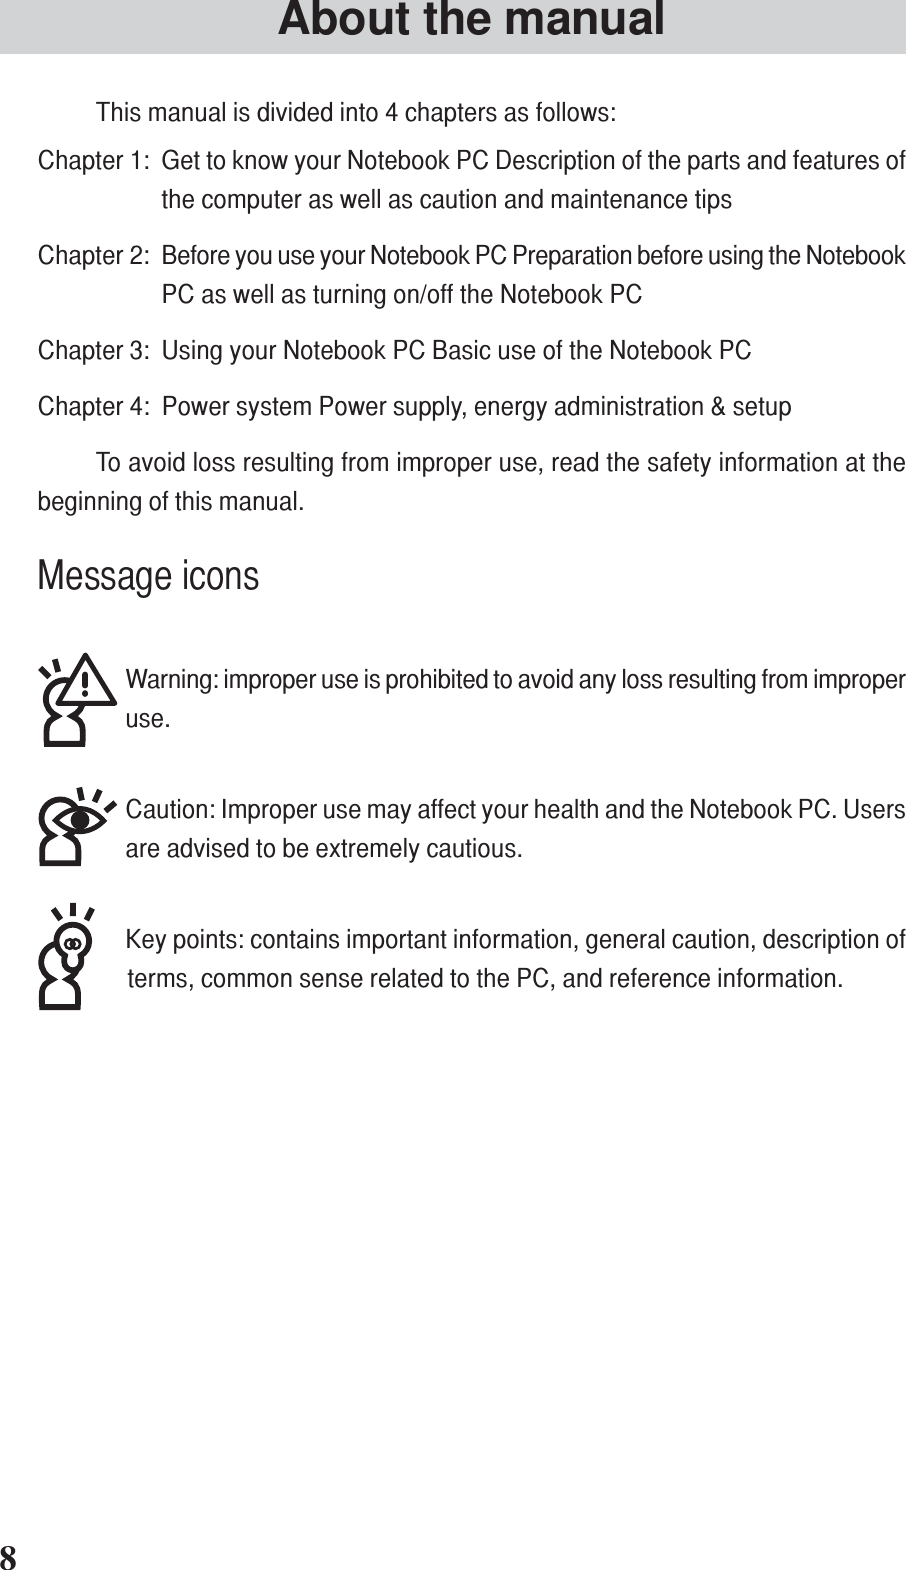 This manual is divided into 4 chapters as follows:Chapter 1: Get to know your Notebook PC Description of the parts and features ofthe computer as well as caution and maintenance tipsChapter 2: Before you use your Notebook PC Preparation before using the NotebookPC as well as turning on/off the Notebook PCChapter 3: Using your Notebook PC Basic use of the Notebook PCChapter 4: Power system Power supply, energy administration &amp; setupTo avoid loss resulting from improper use, read the safety information at thebeginning of this manual.Message iconsWarning: improper use is prohibited to avoid any loss resulting from improperuse.Caution: Improper use may affect your health and the Notebook PC. Usersare advised to be extremely cautious.Key points: contains important information, general caution, description ofterms, common sense related to the PC, and reference information.About the manual8